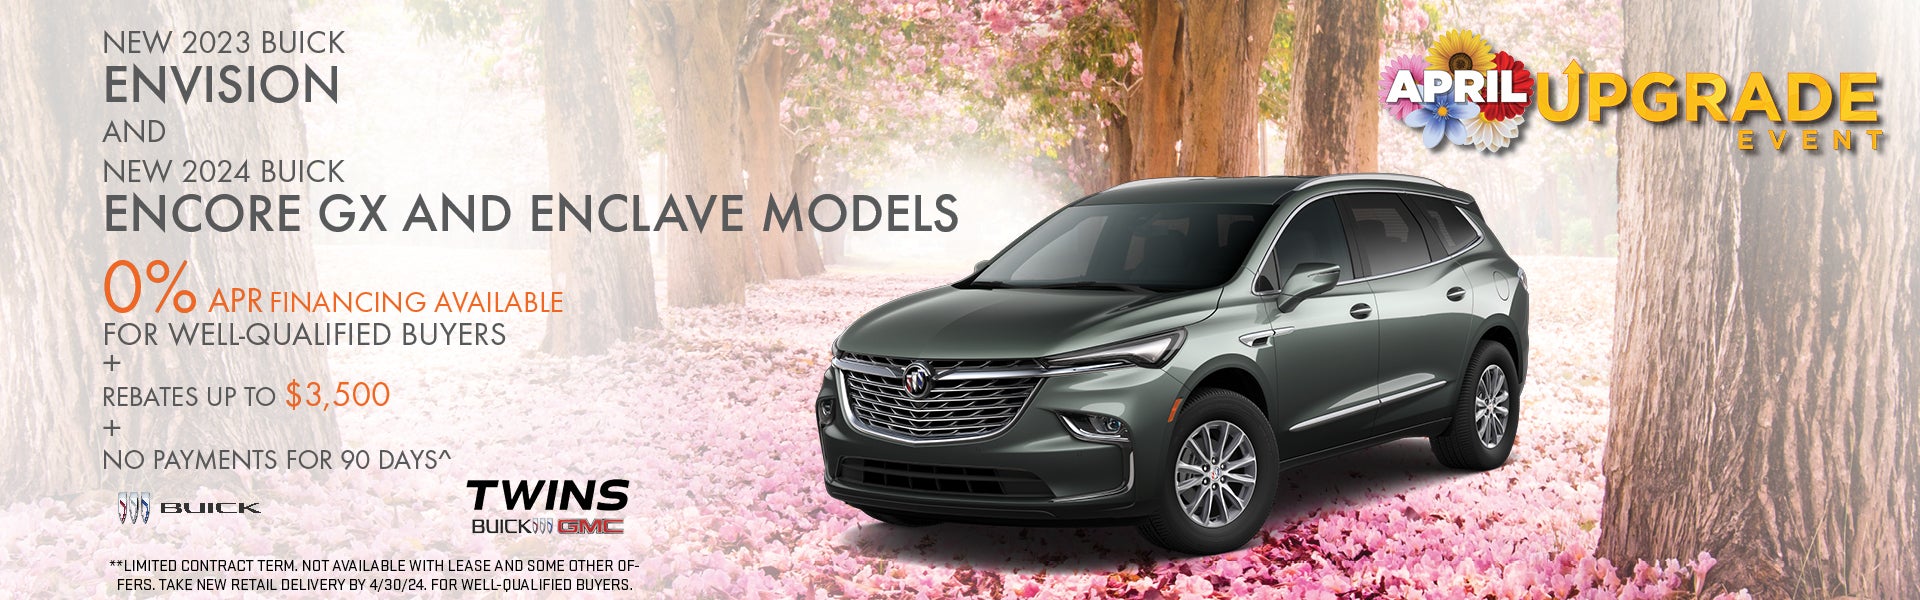 2024 Buick Envision and 2024 Buick Encore GX and Enclave 